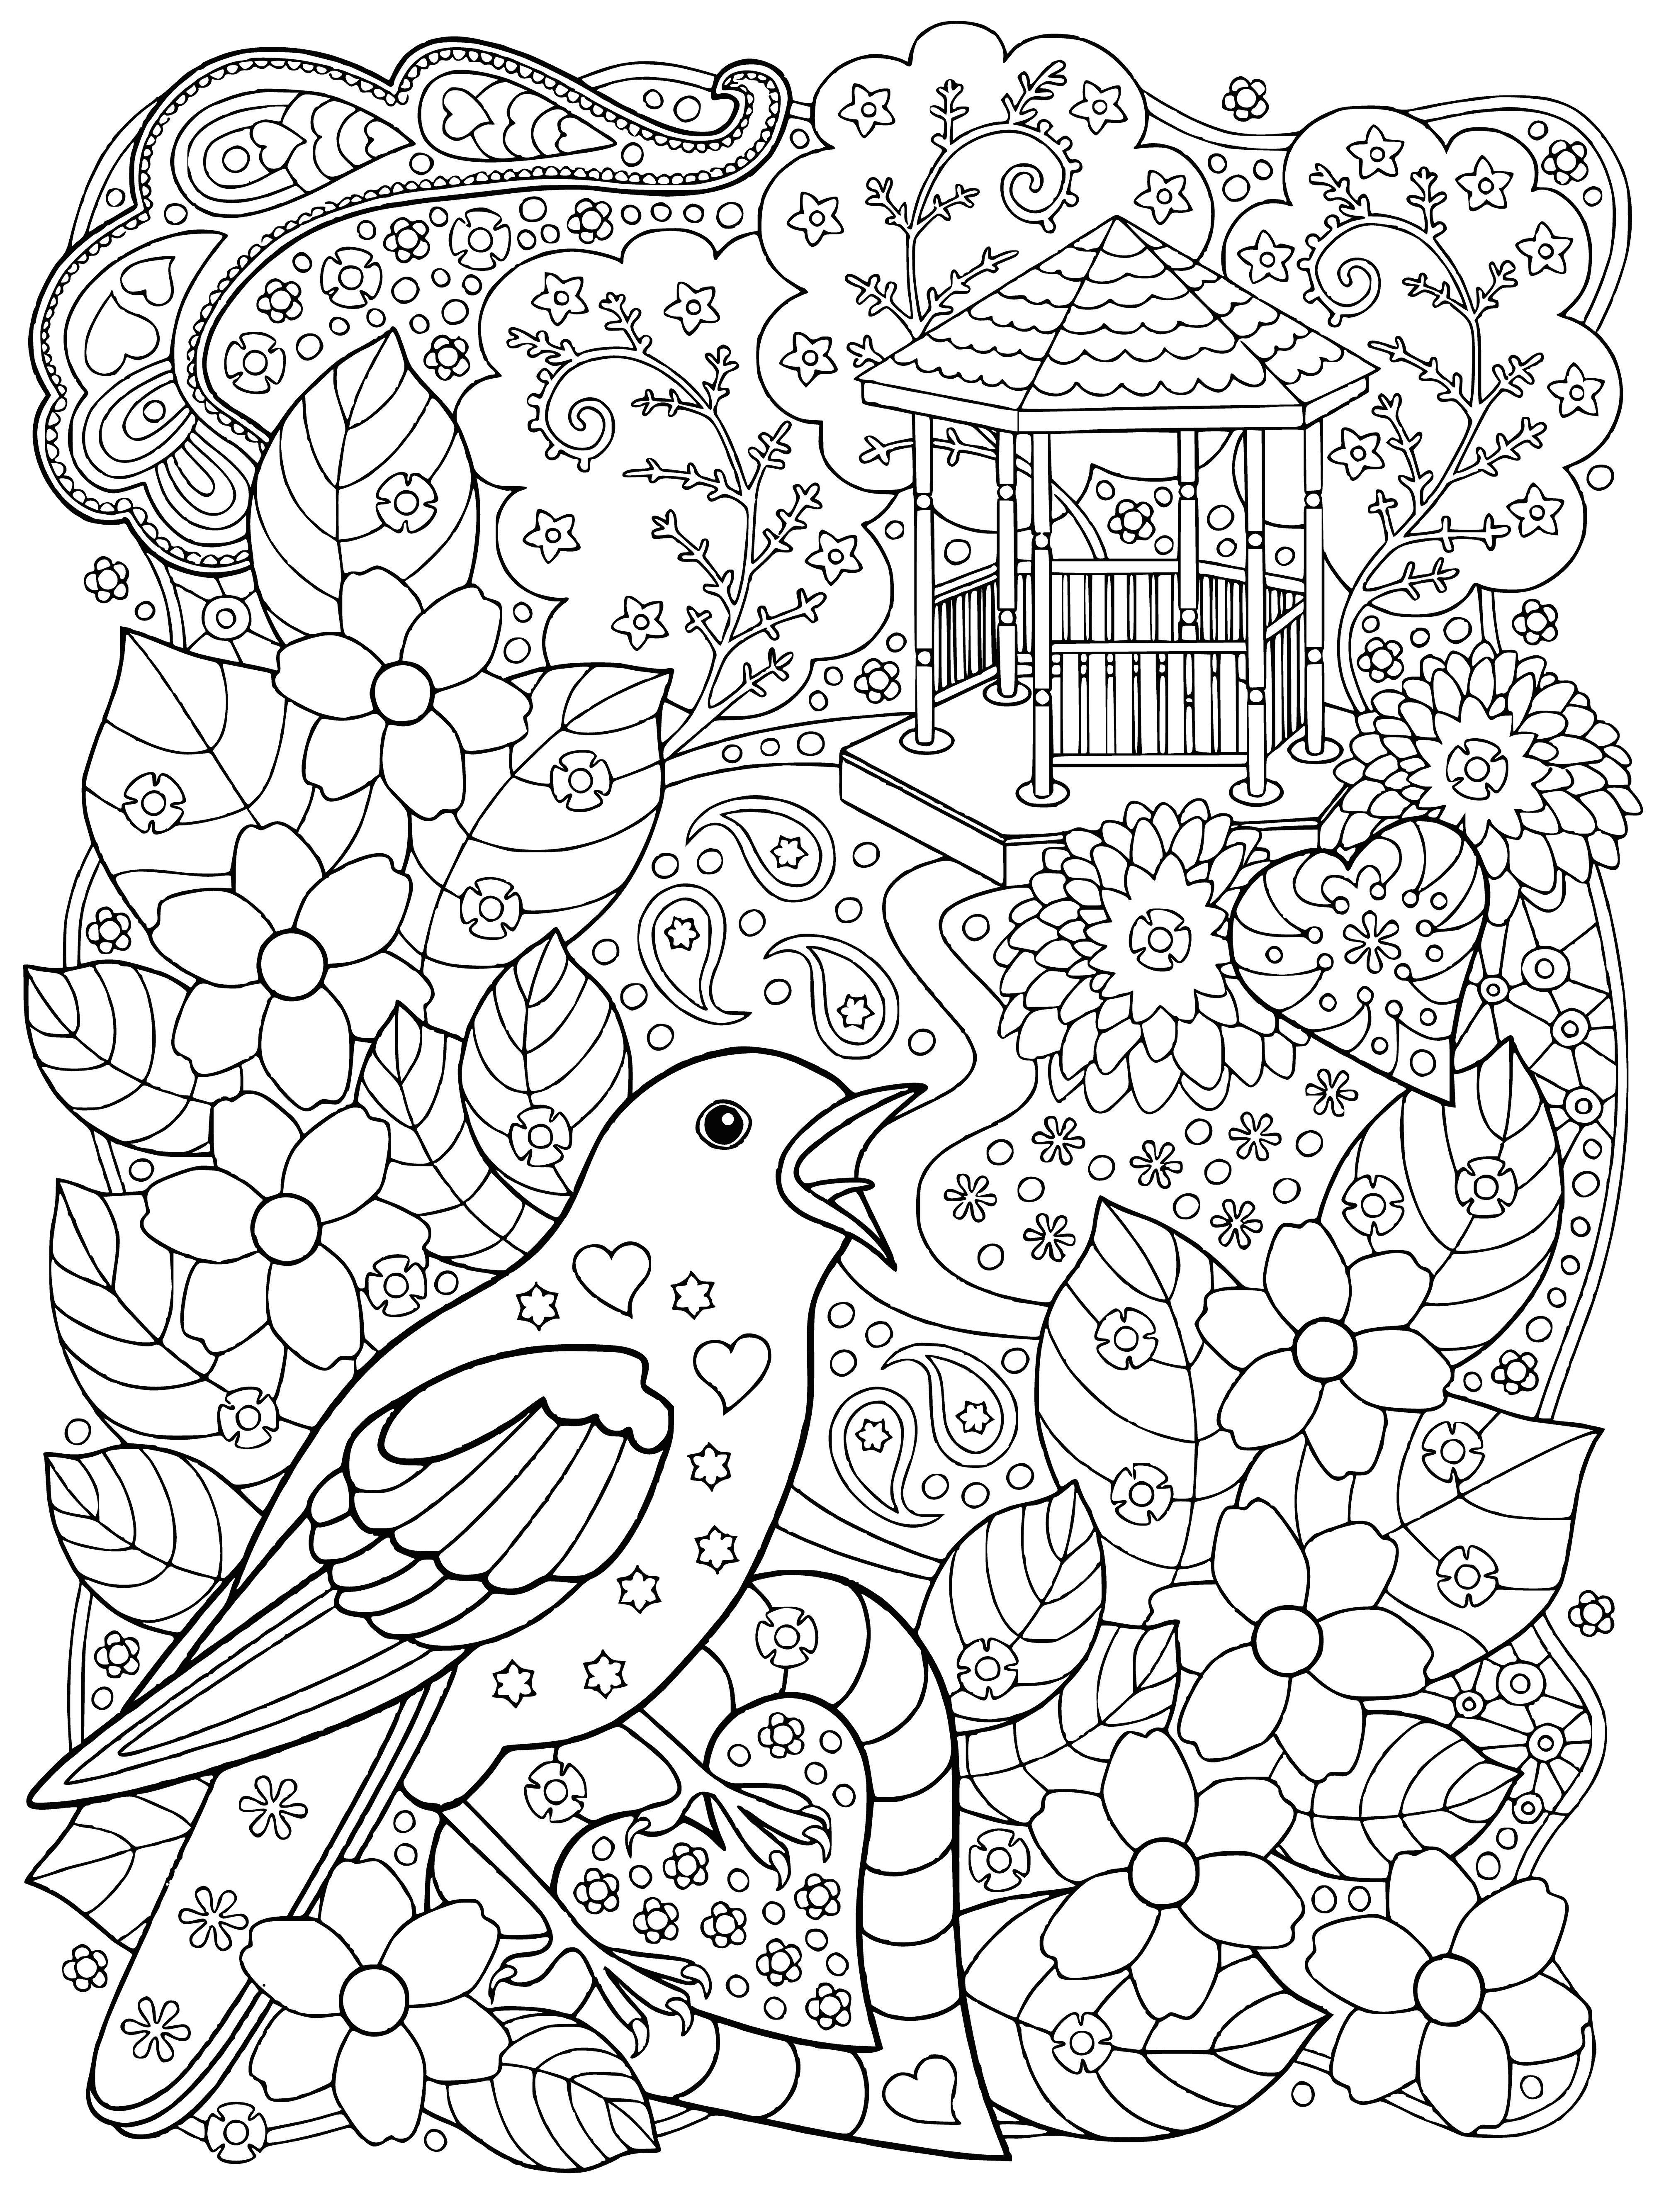 coloring page: Bird flying around gazebo: square roof, four pillars, stairs up.